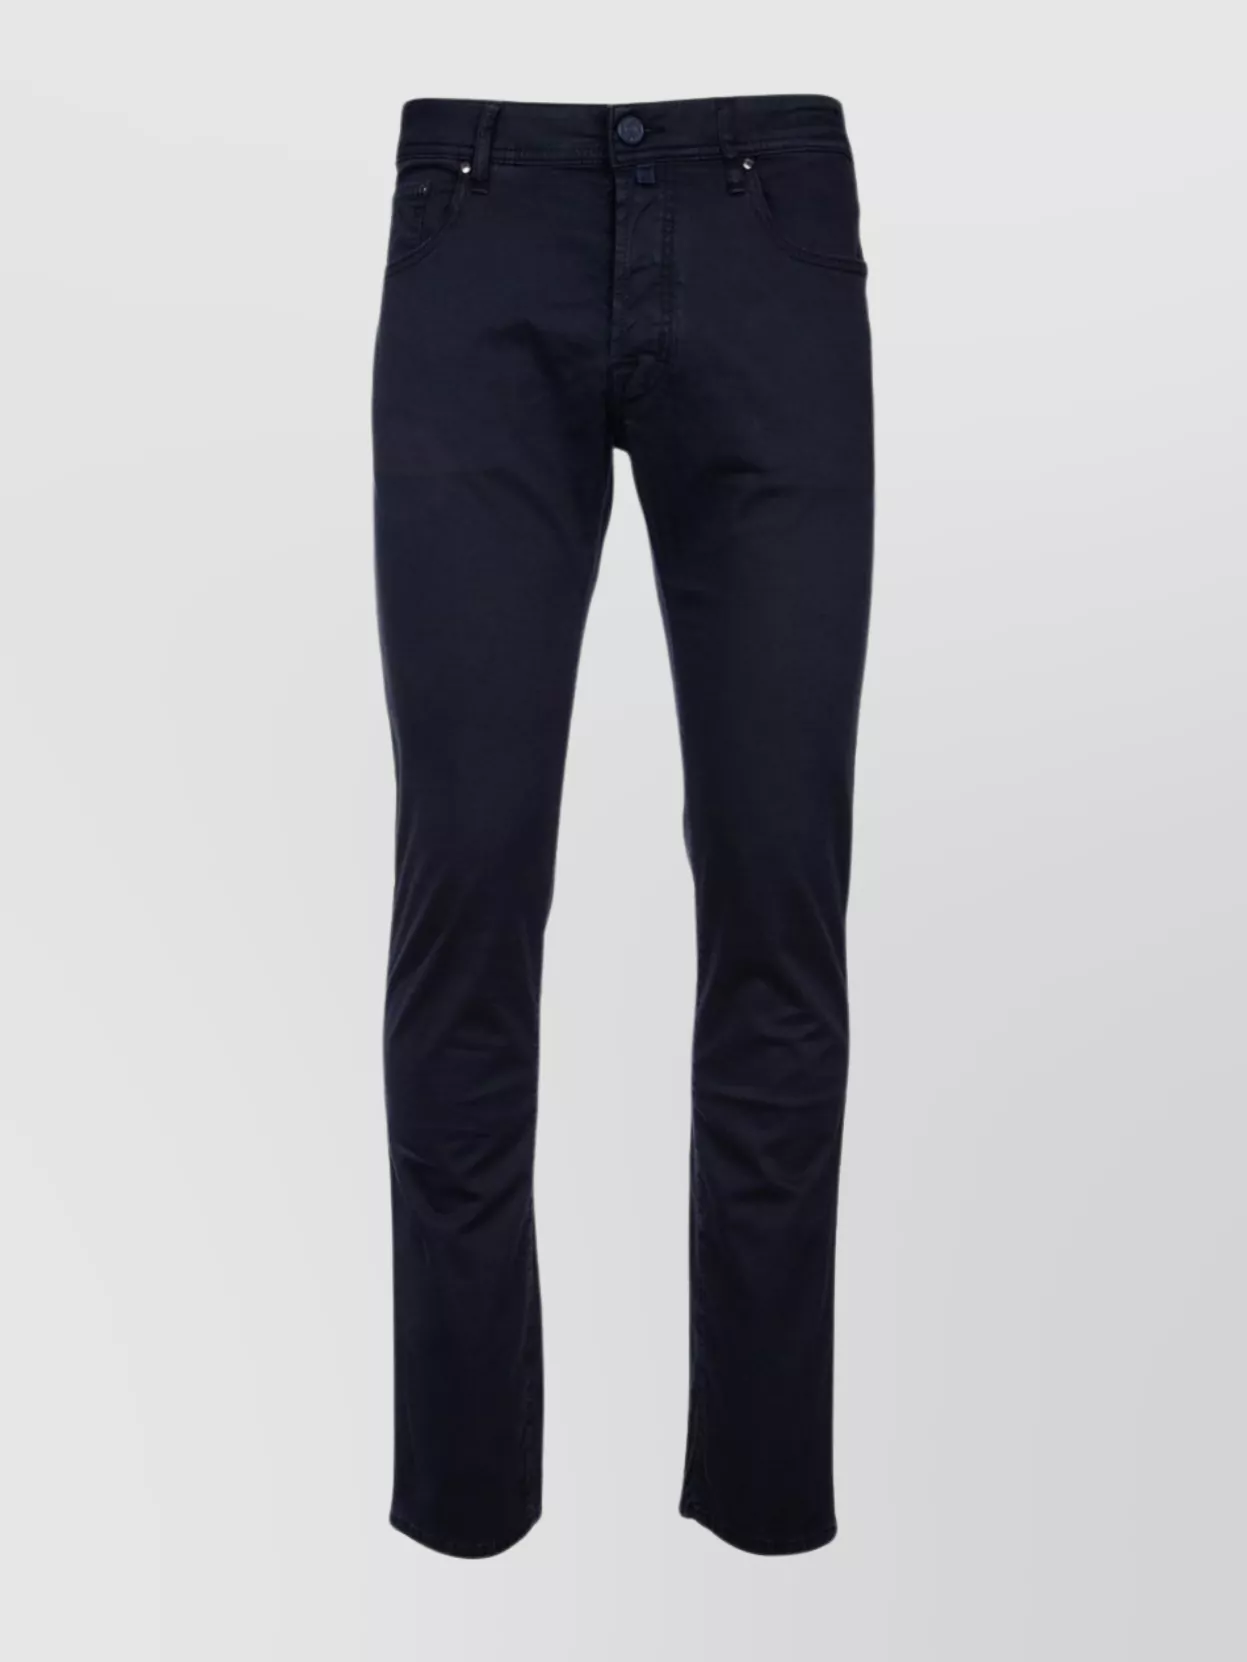 Shop Jacob Cohen Trousers With Belt Loops For Stylish Look